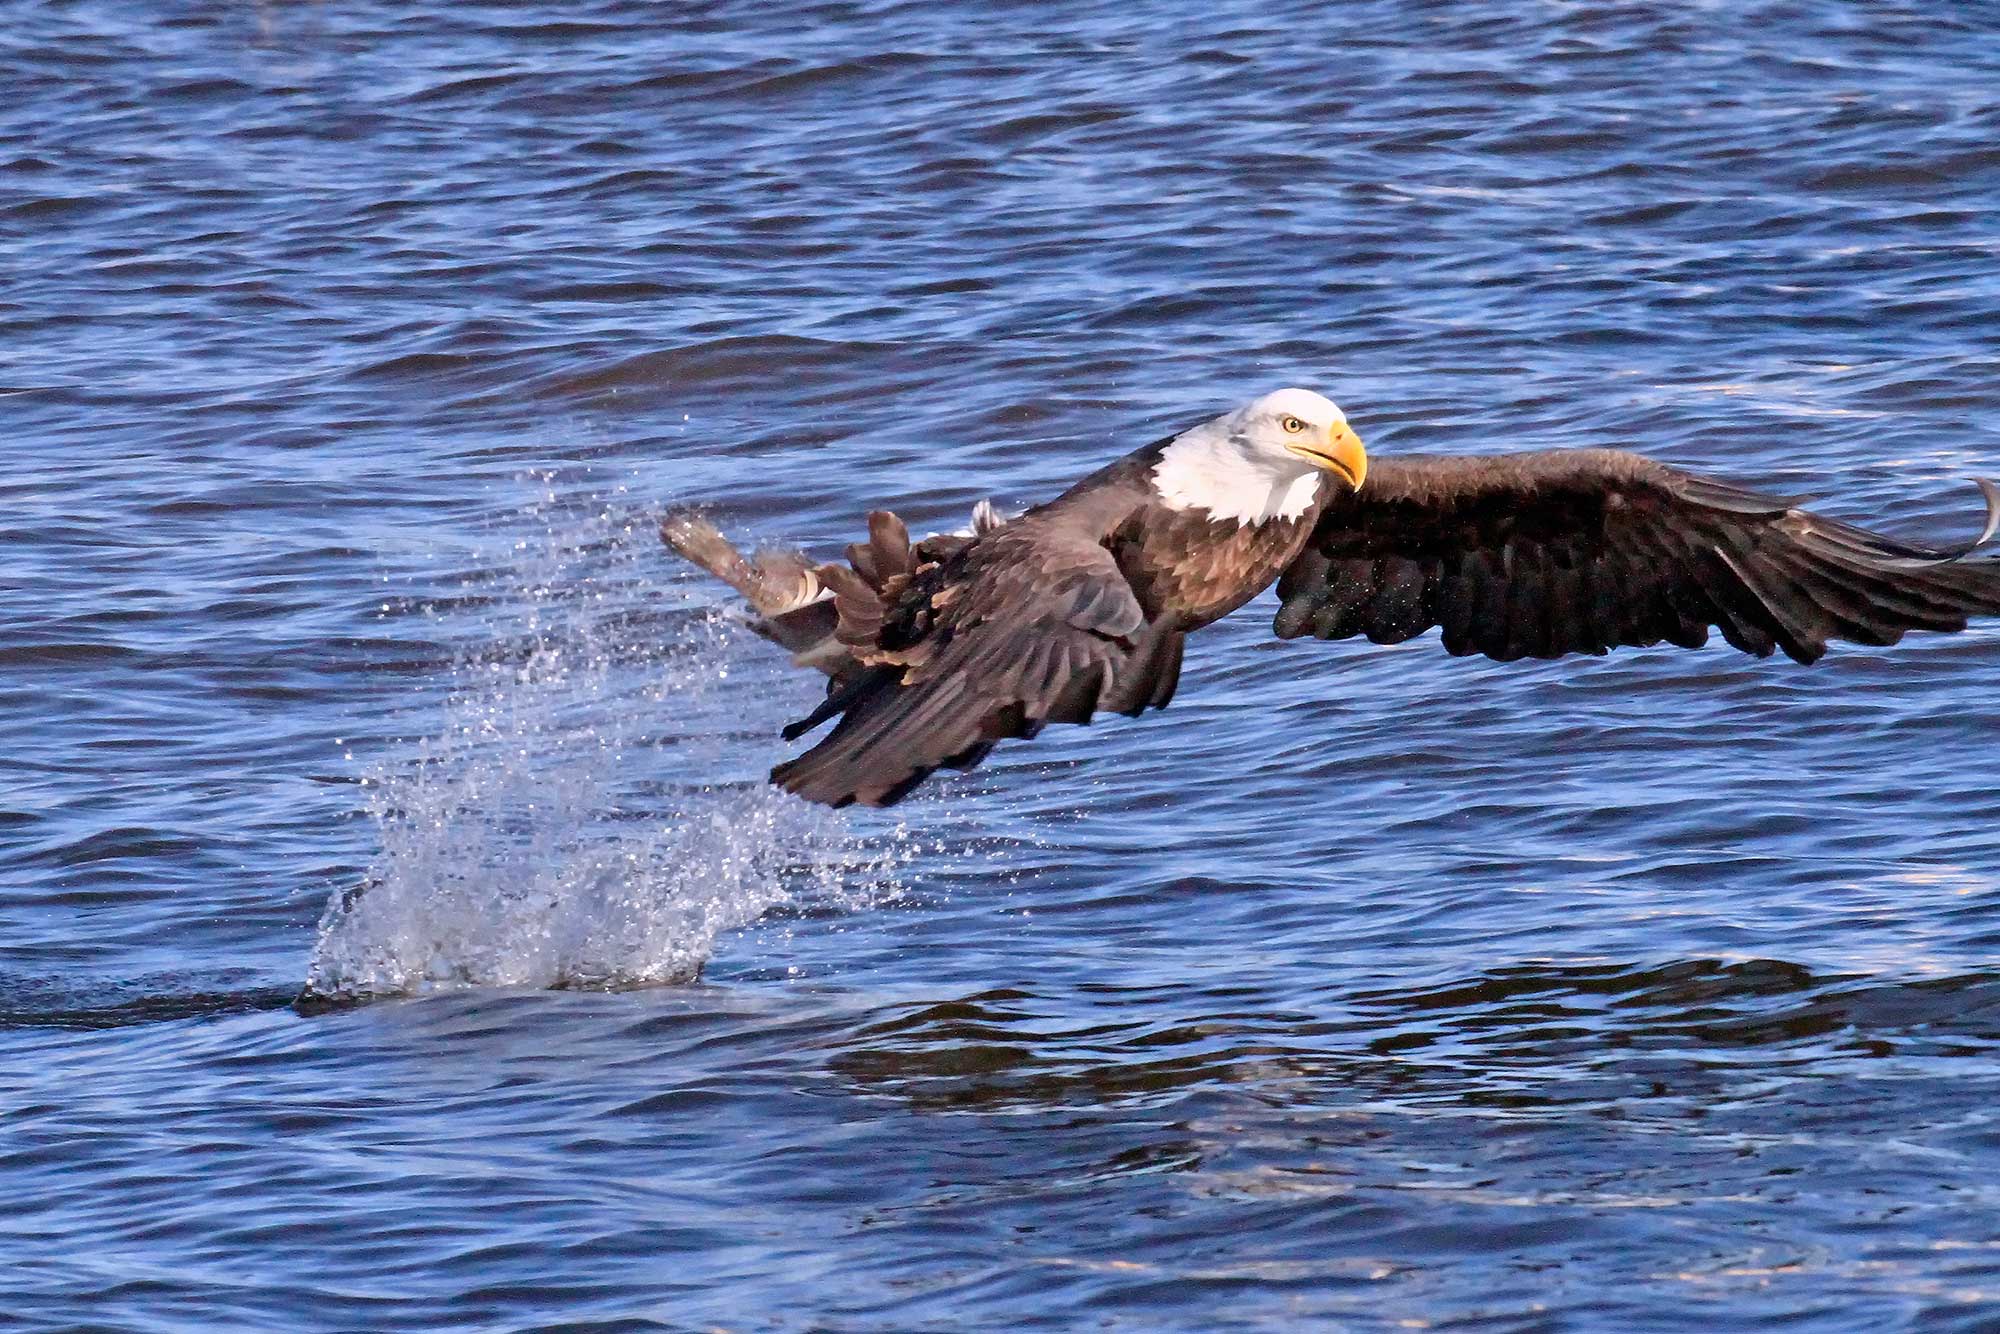 A bald eagle in flight over the water.